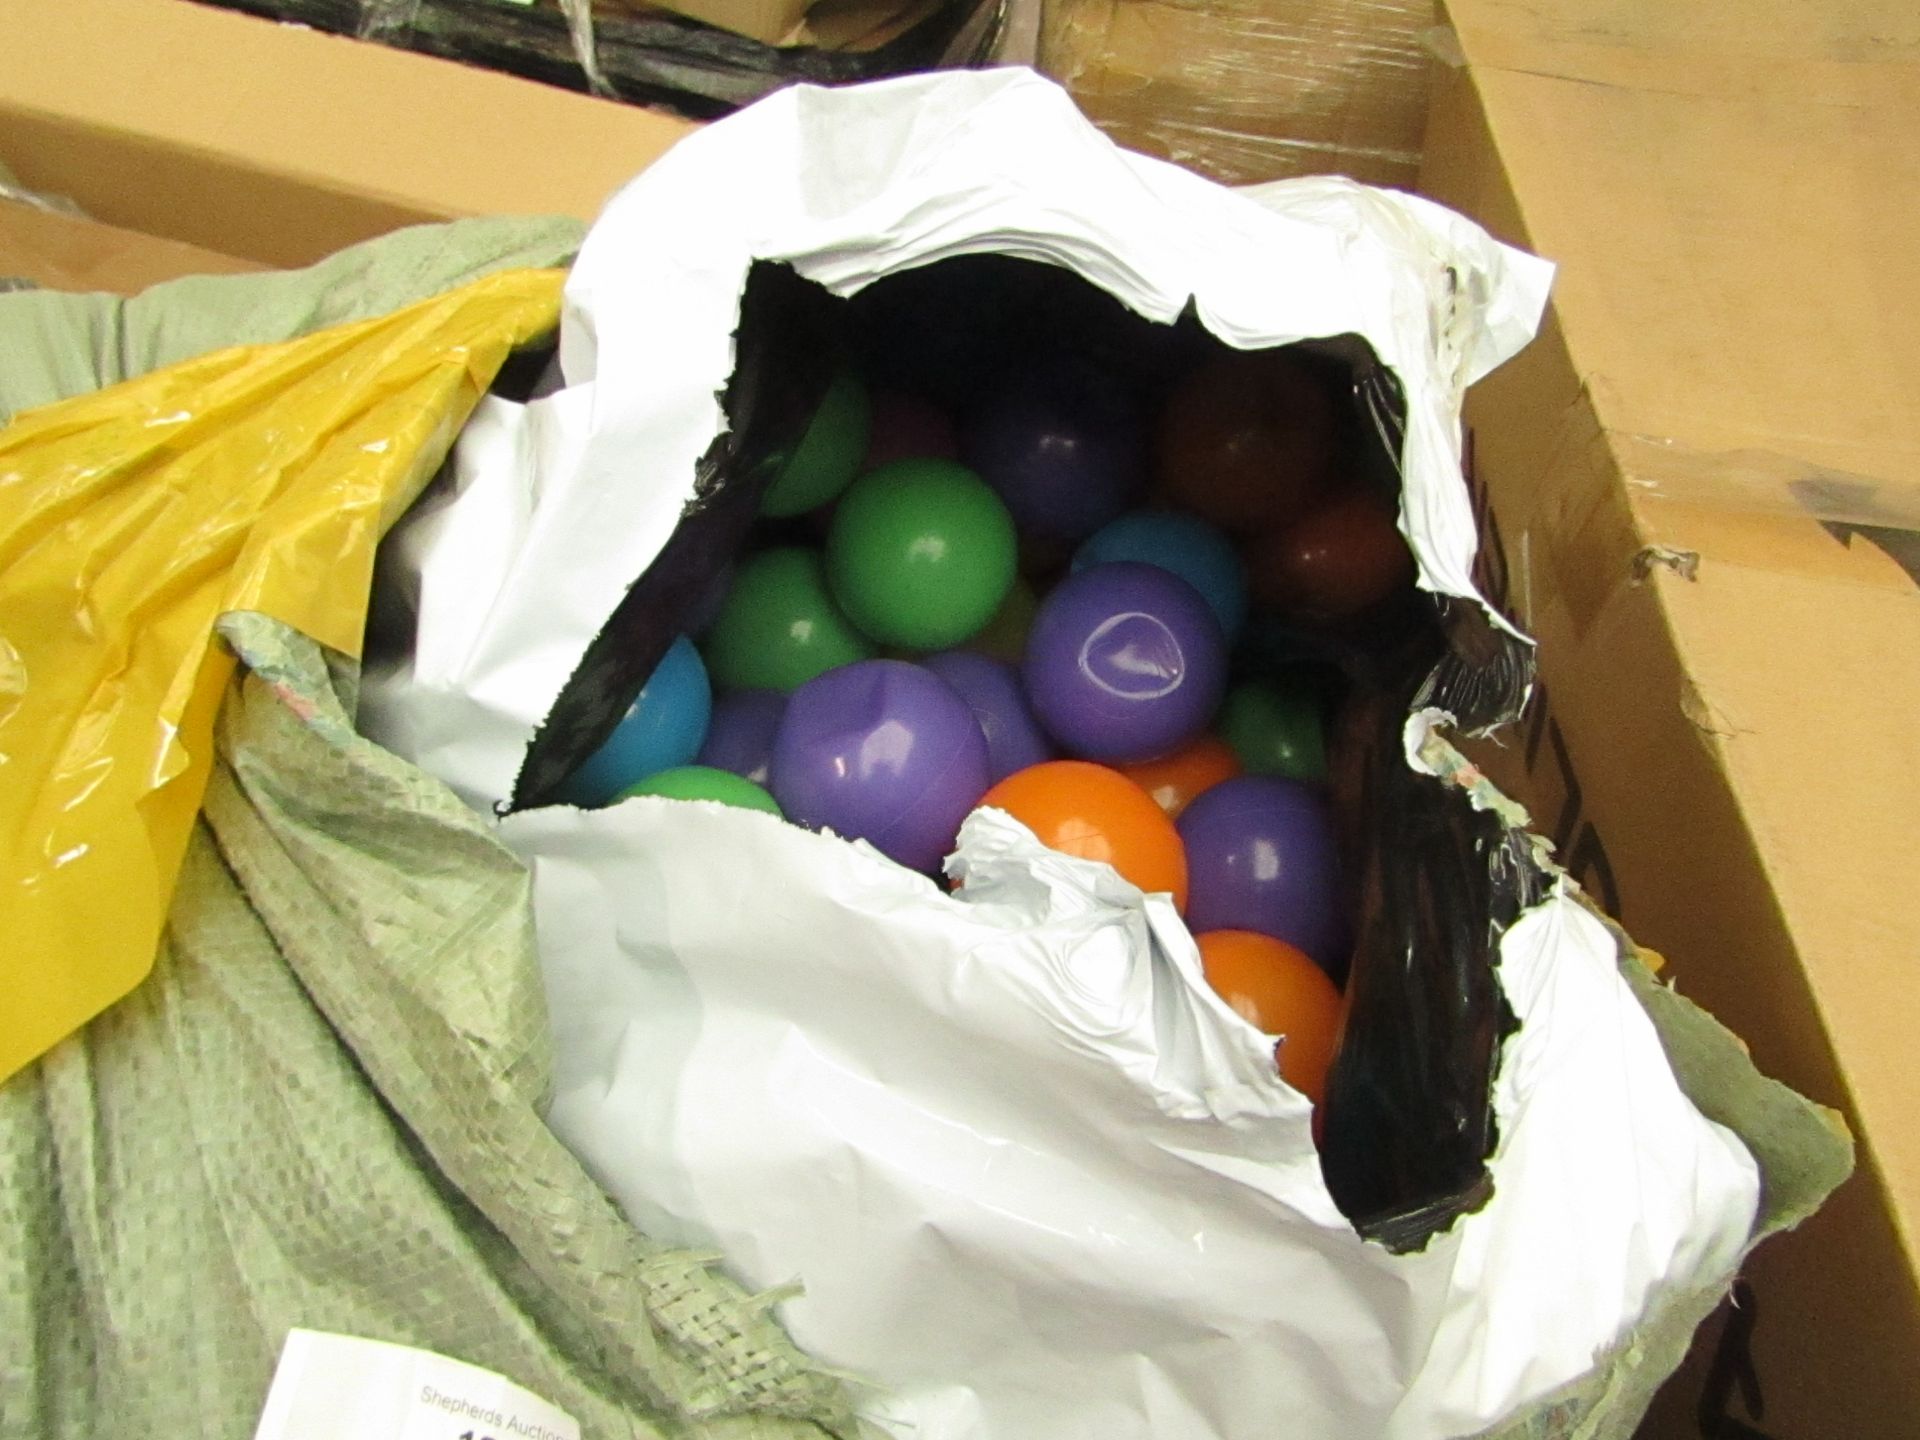 Pack of approx 100 Plastic Play/Ball Pond Balls new